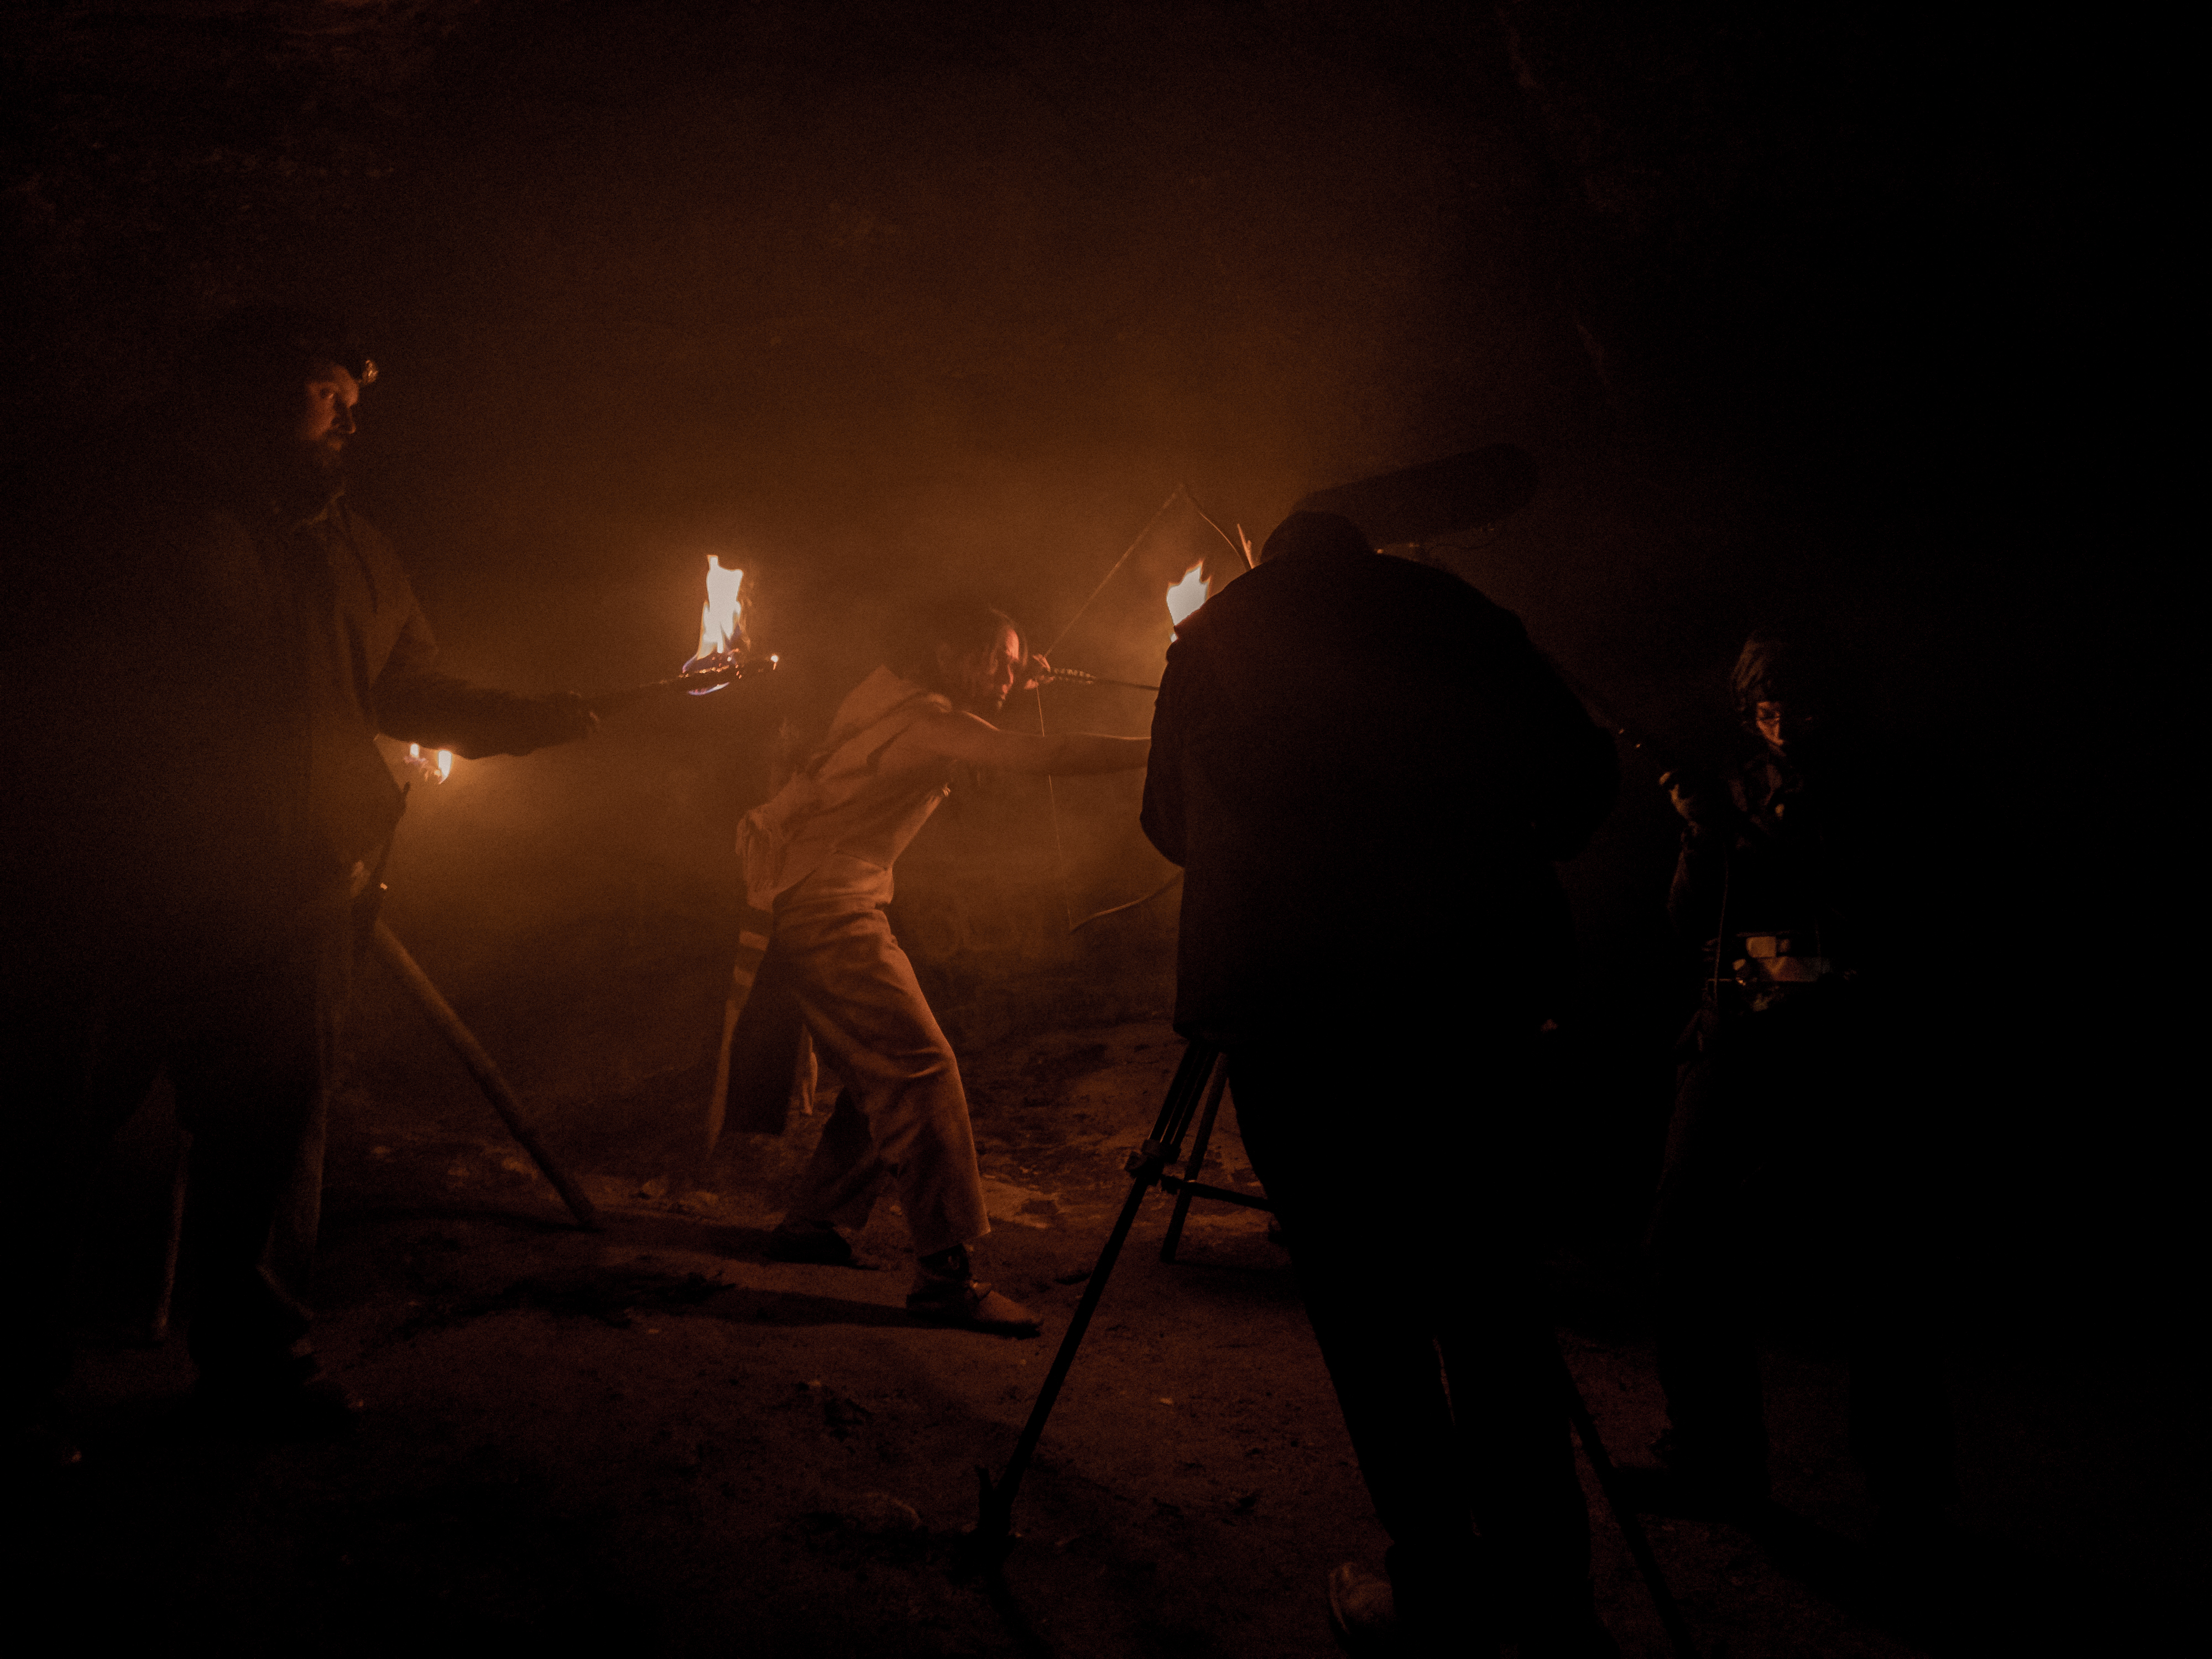 A nighttime scene shows an actor holding a bow and arrow in front of the camera, lit by torch light.